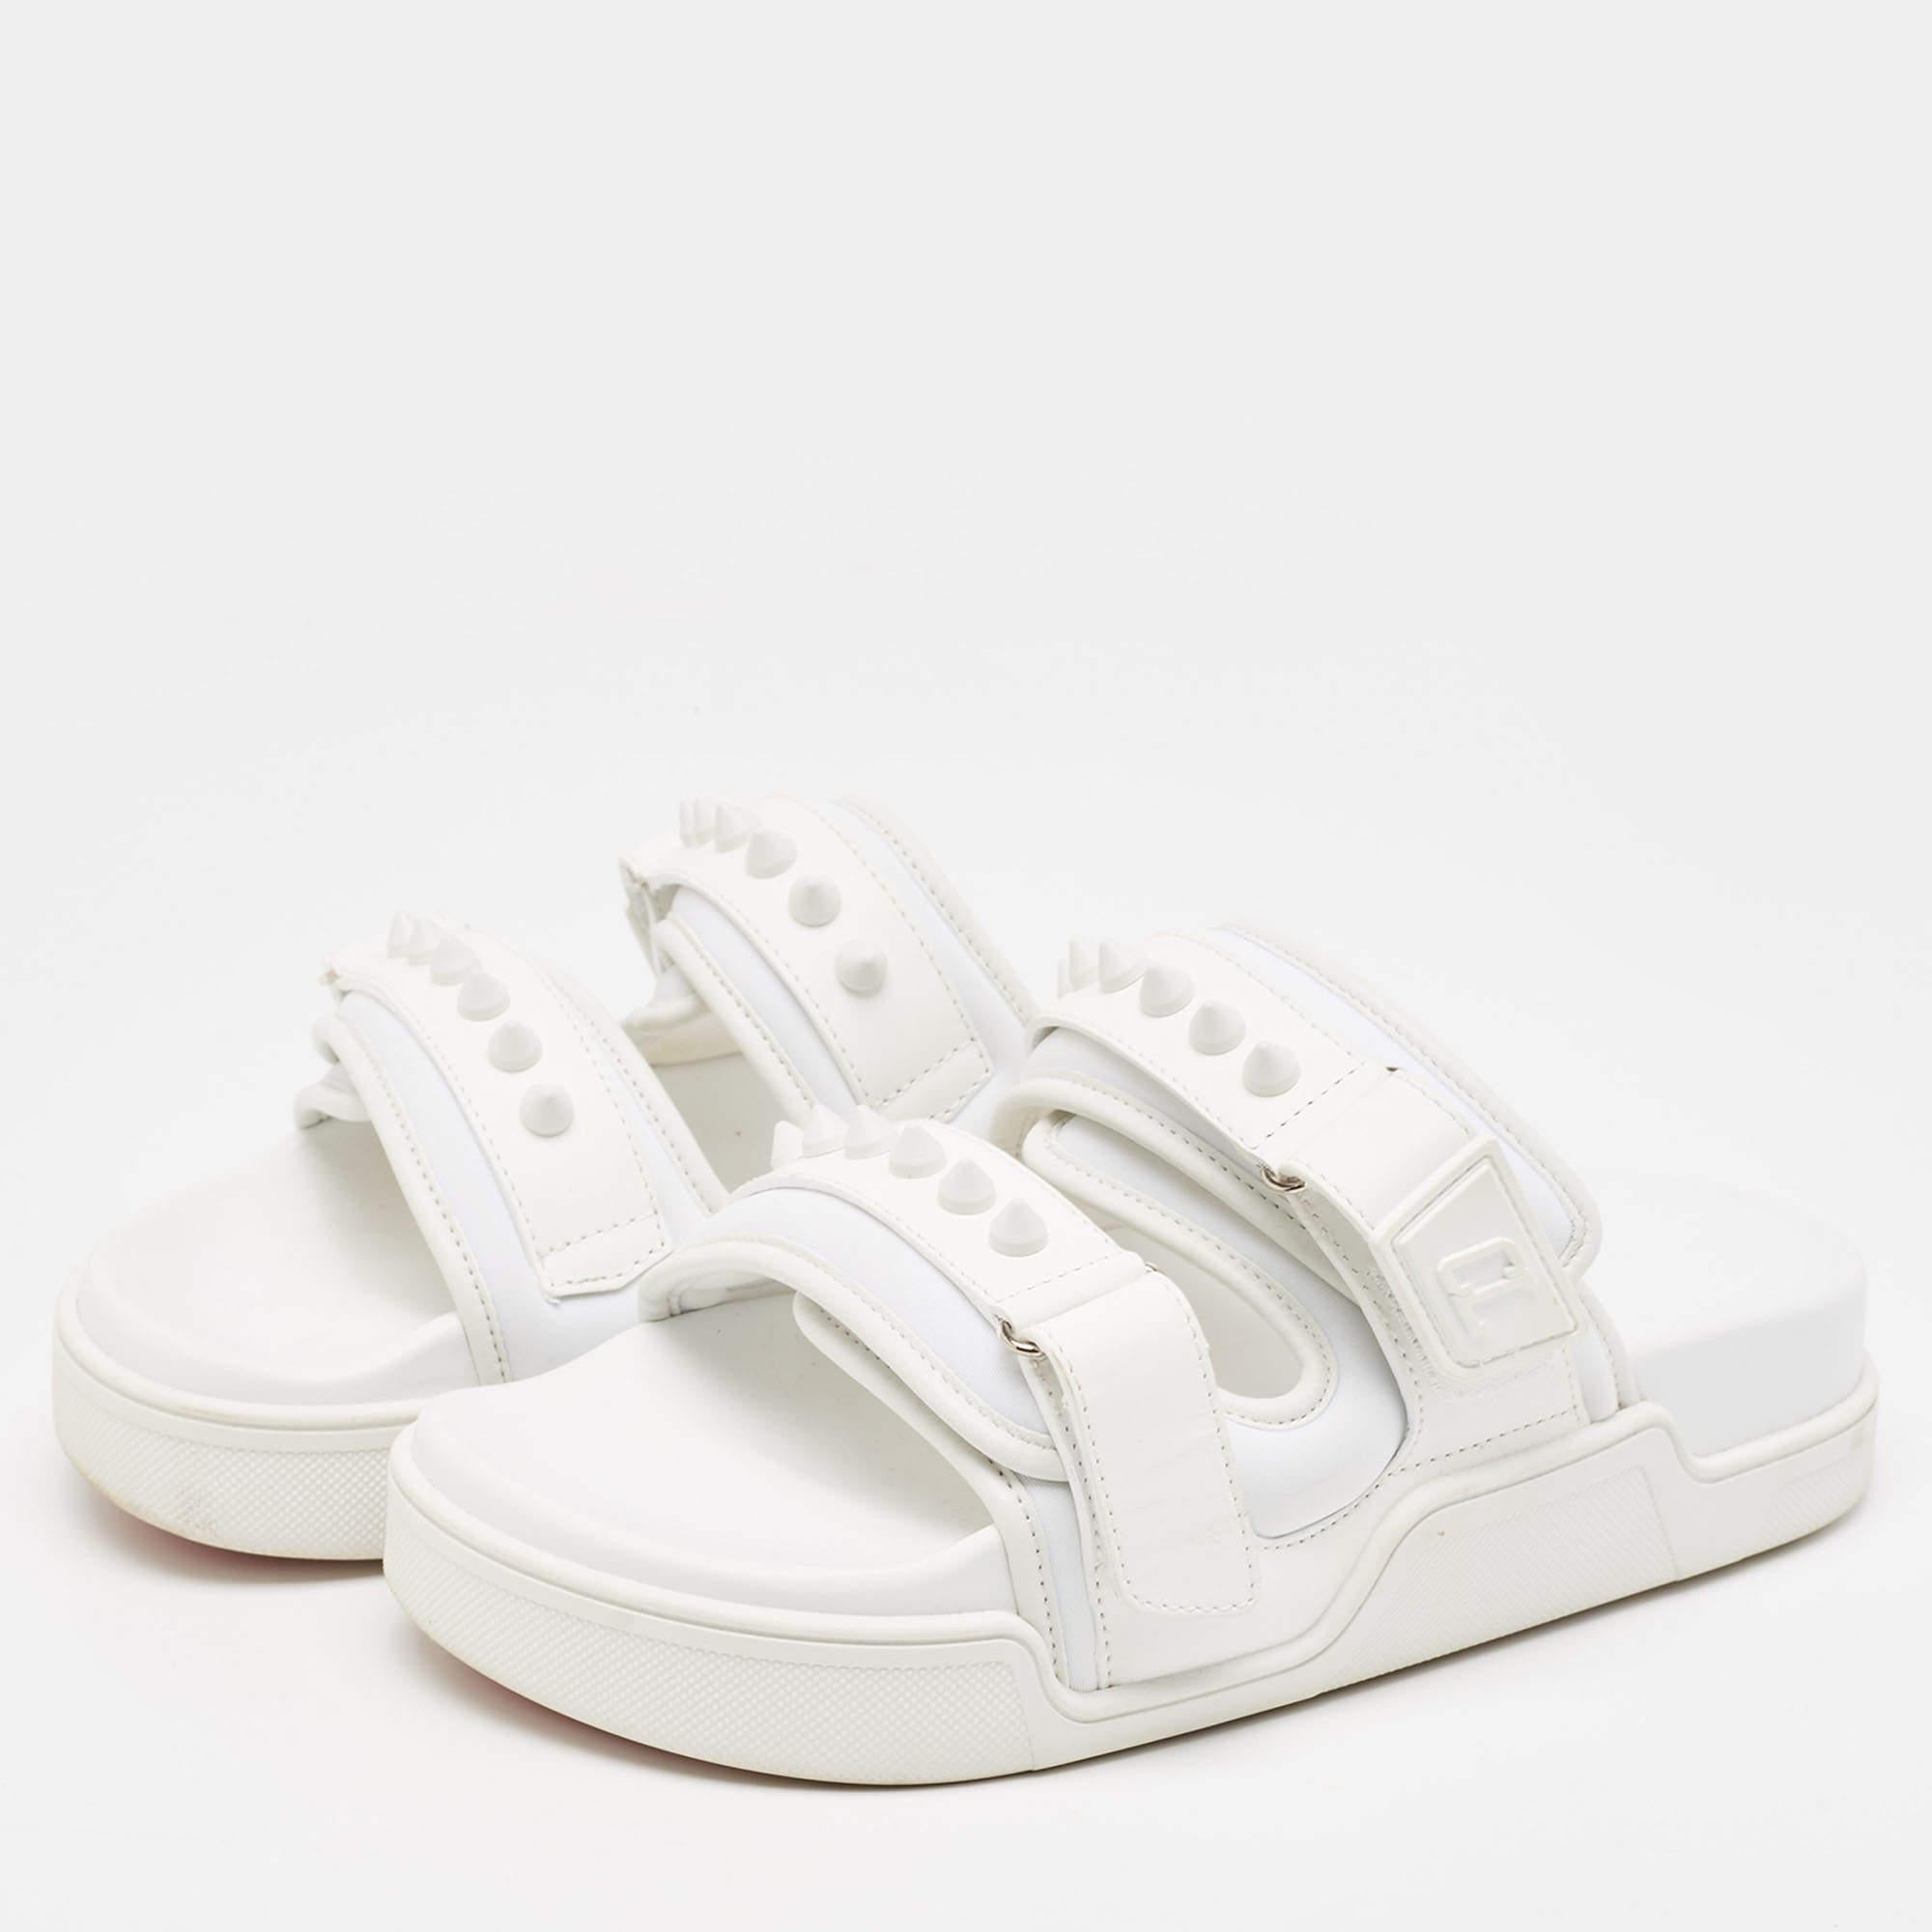 Christian Louboutin White Neoprene and Leather Daddy Pool Sandals Size 39 For Sale 1